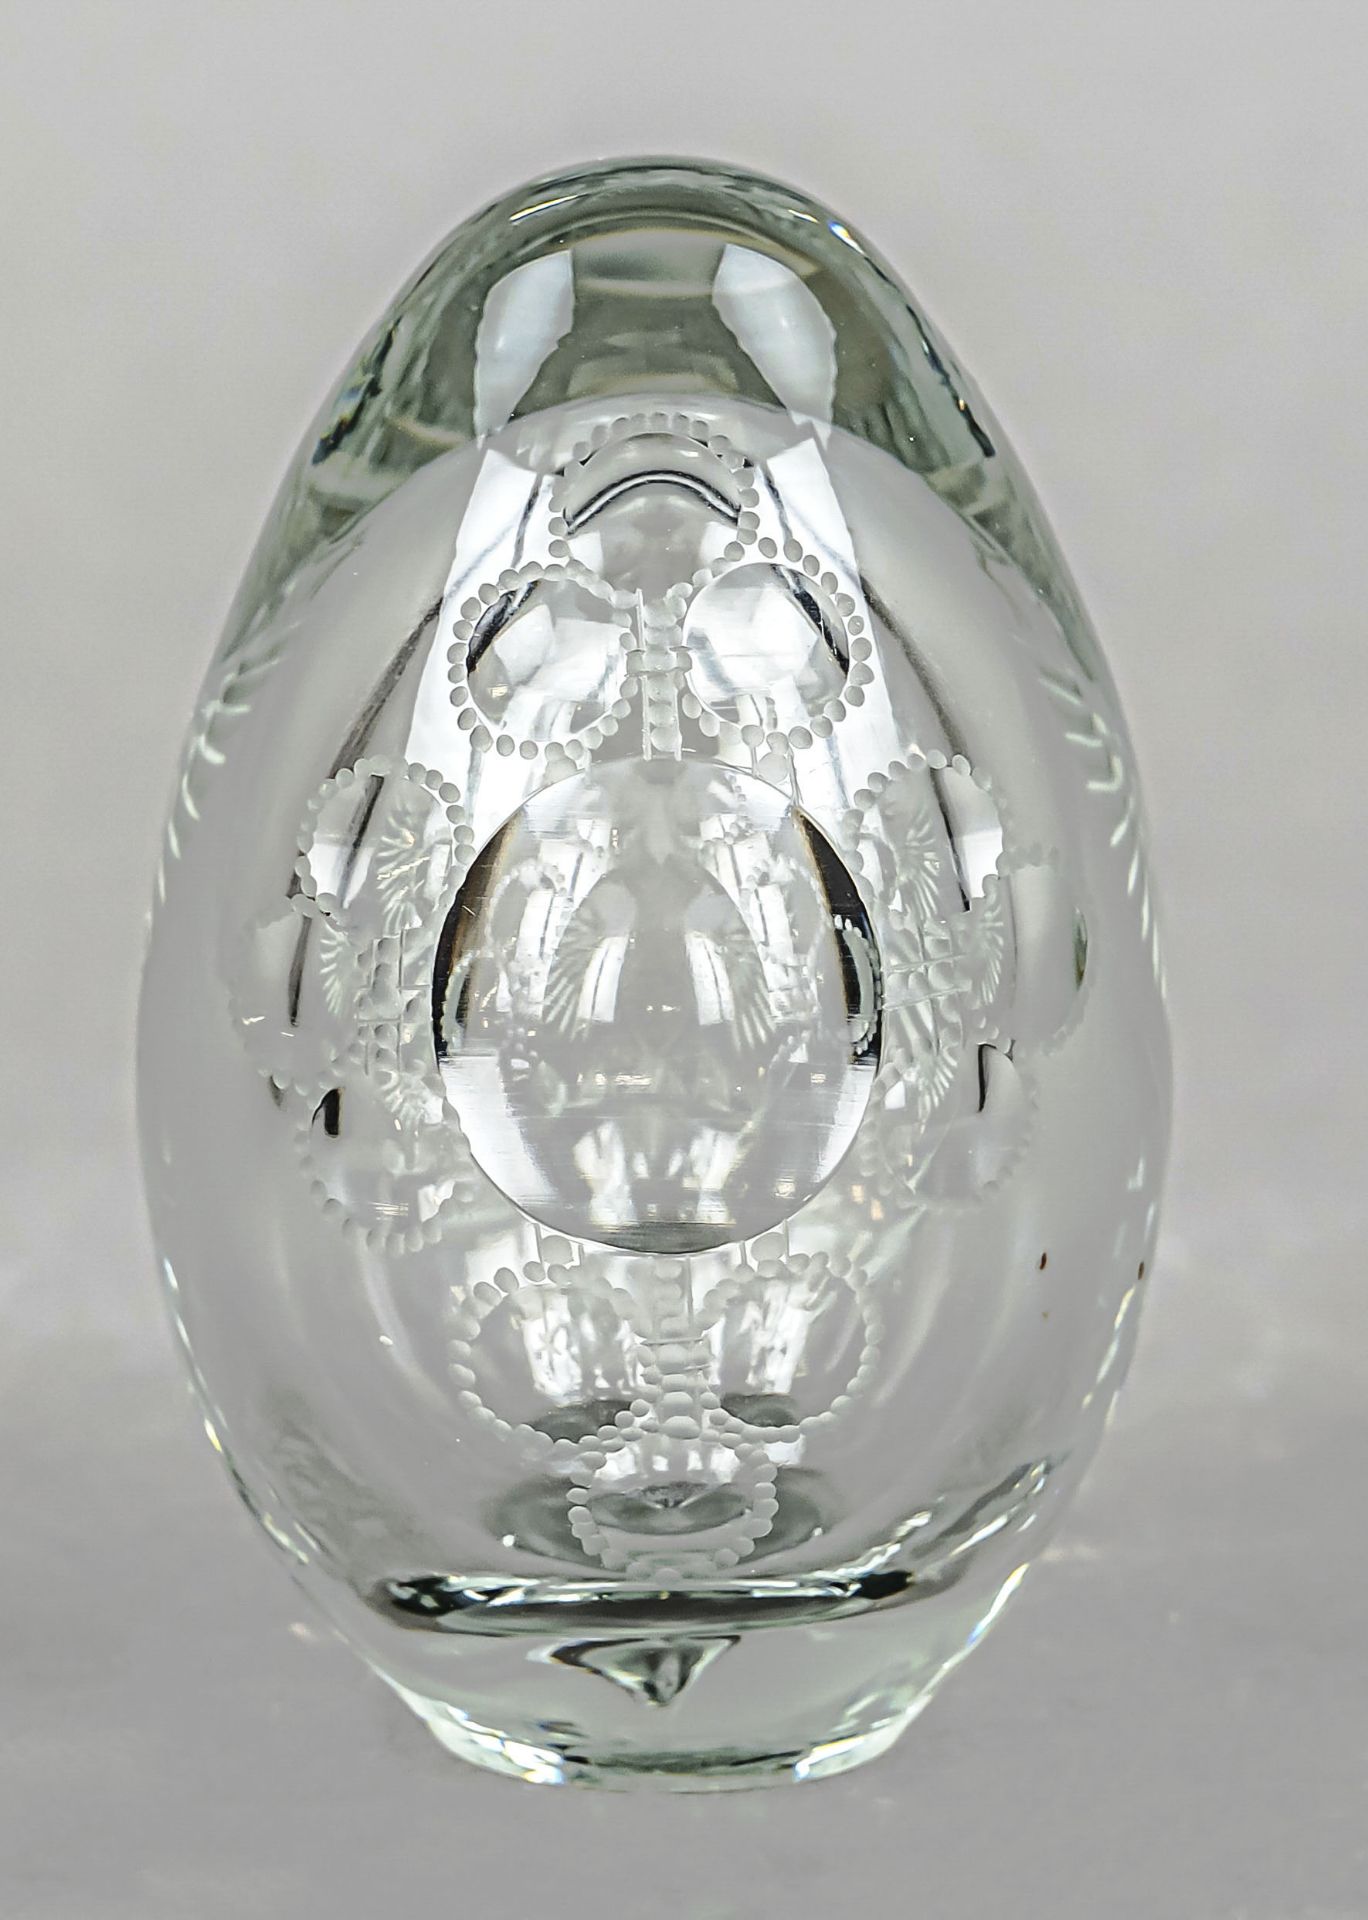 Paperweight, Russia, early 20th century, egg-shaped, clear glass with cut decoration, double - Image 2 of 2